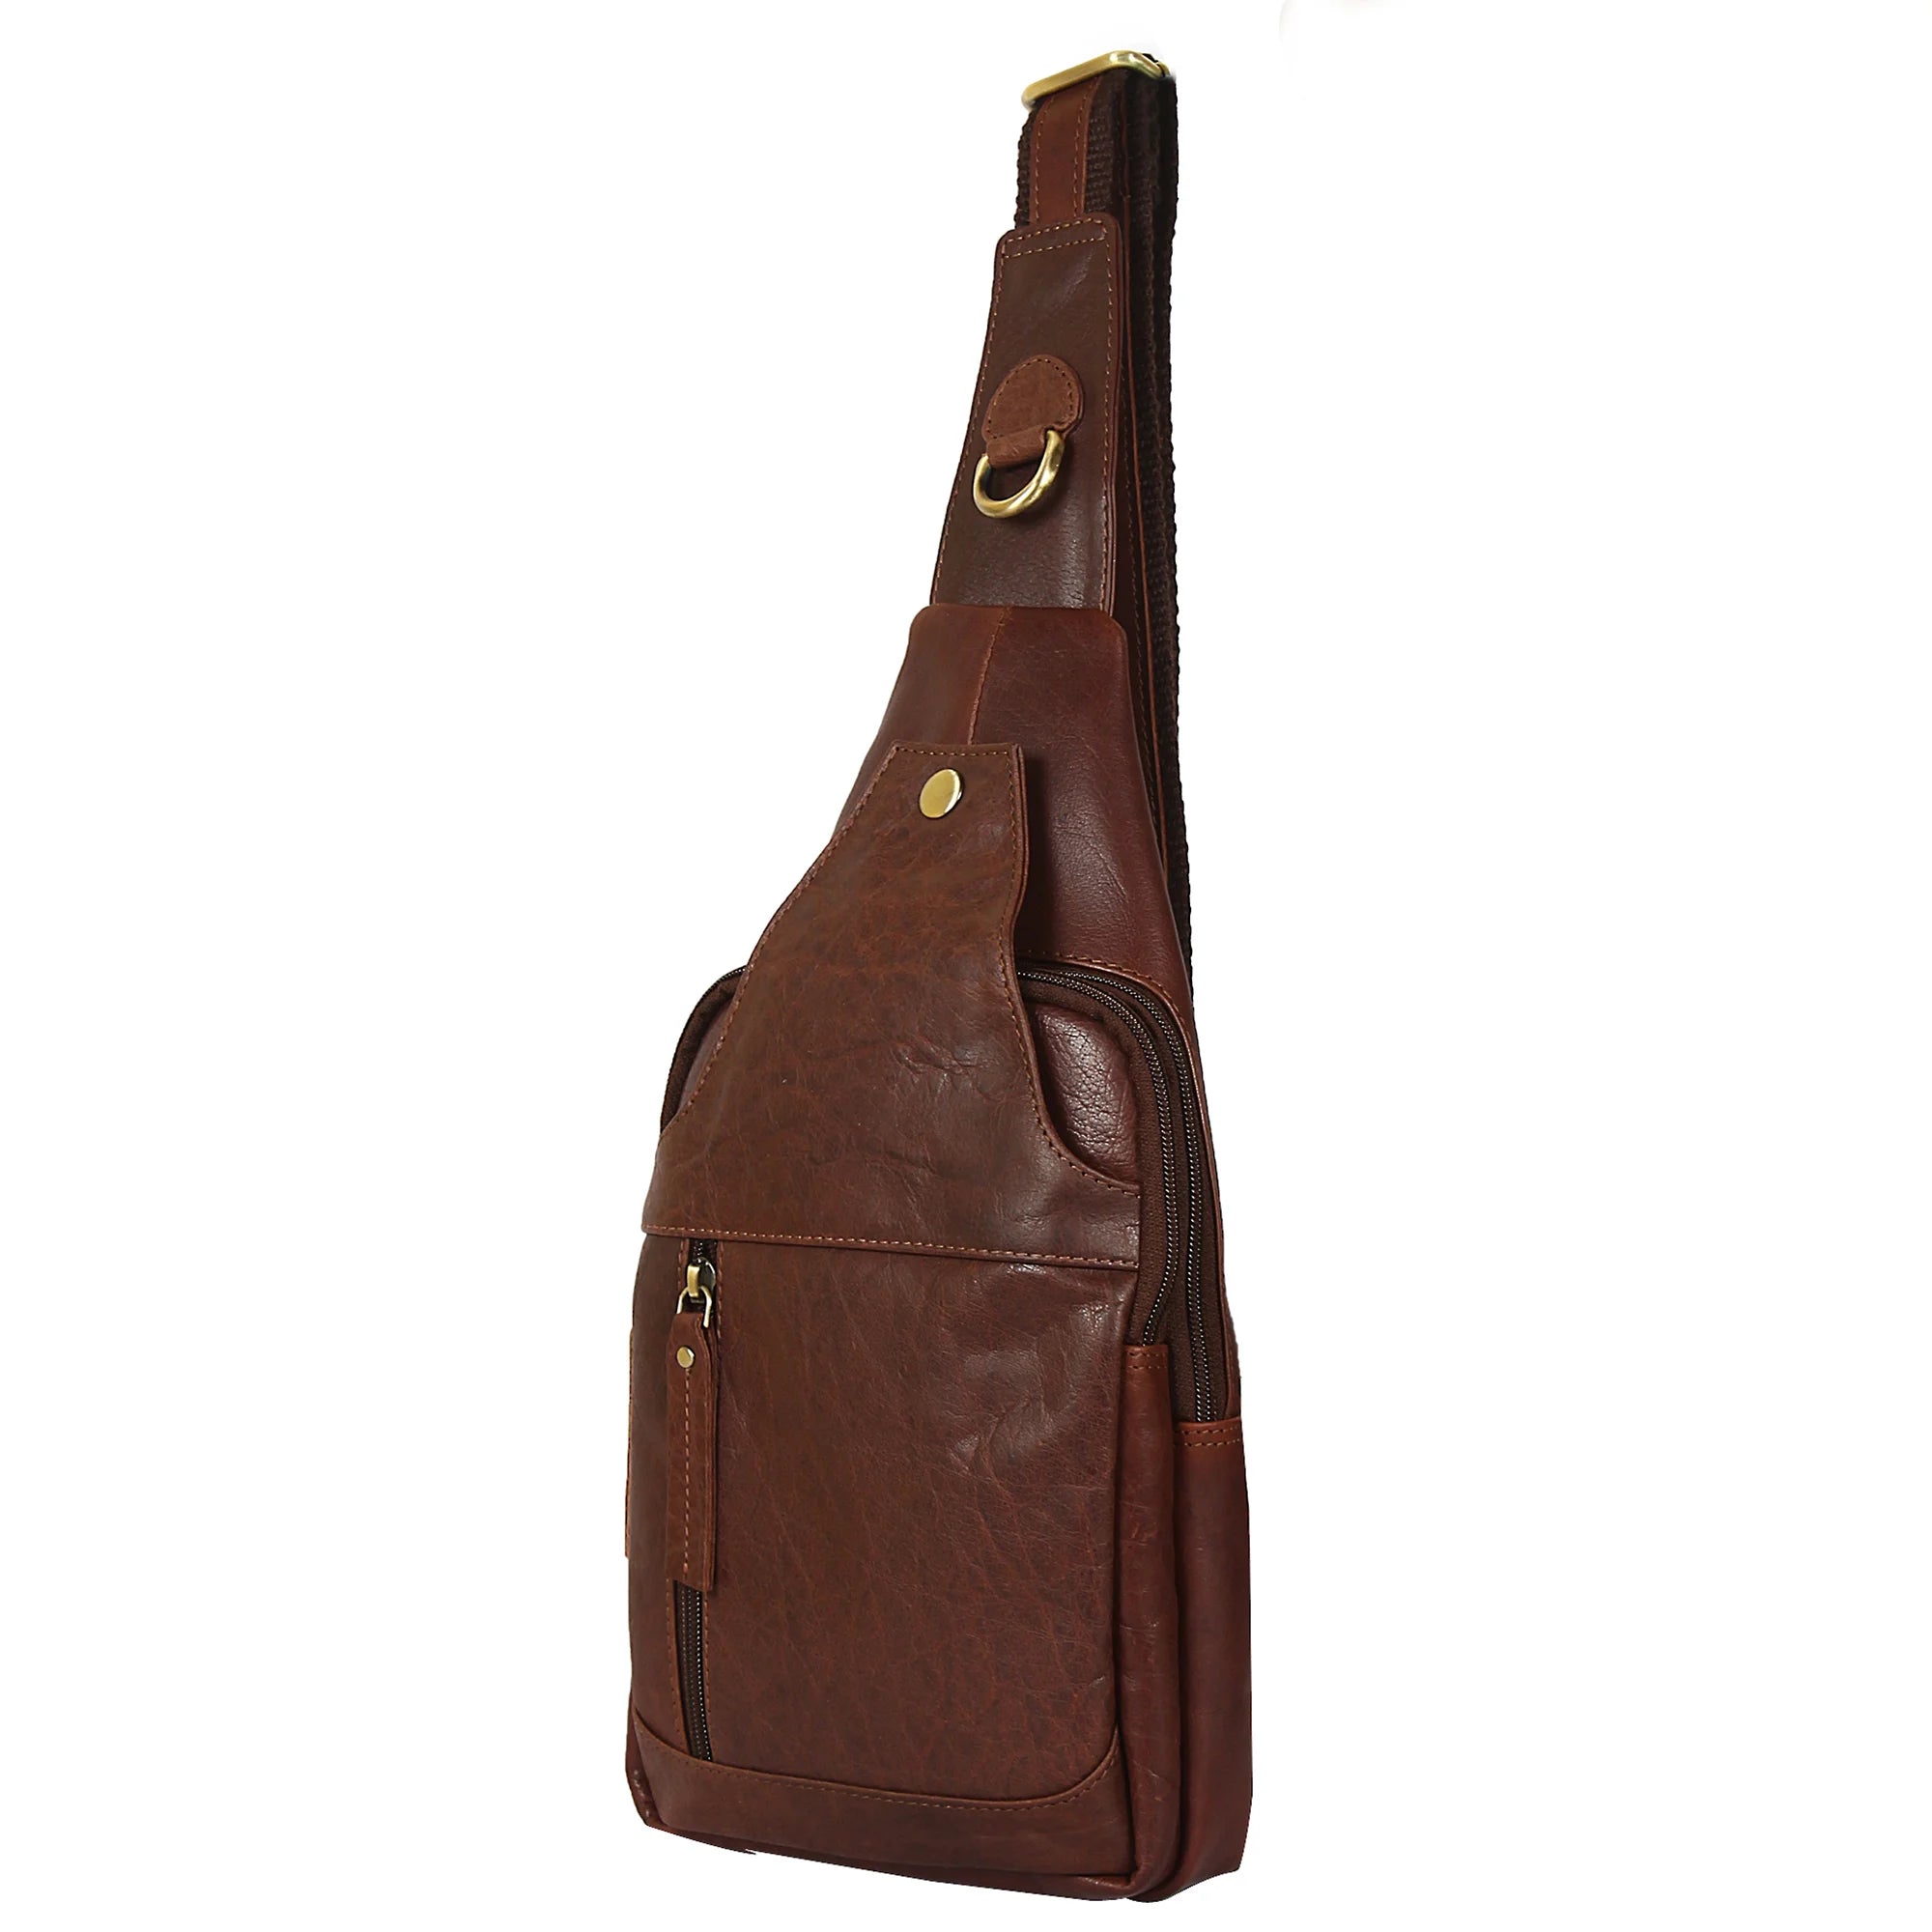 Leather Laptop Backpack for Women, Cognac – Rustic Town